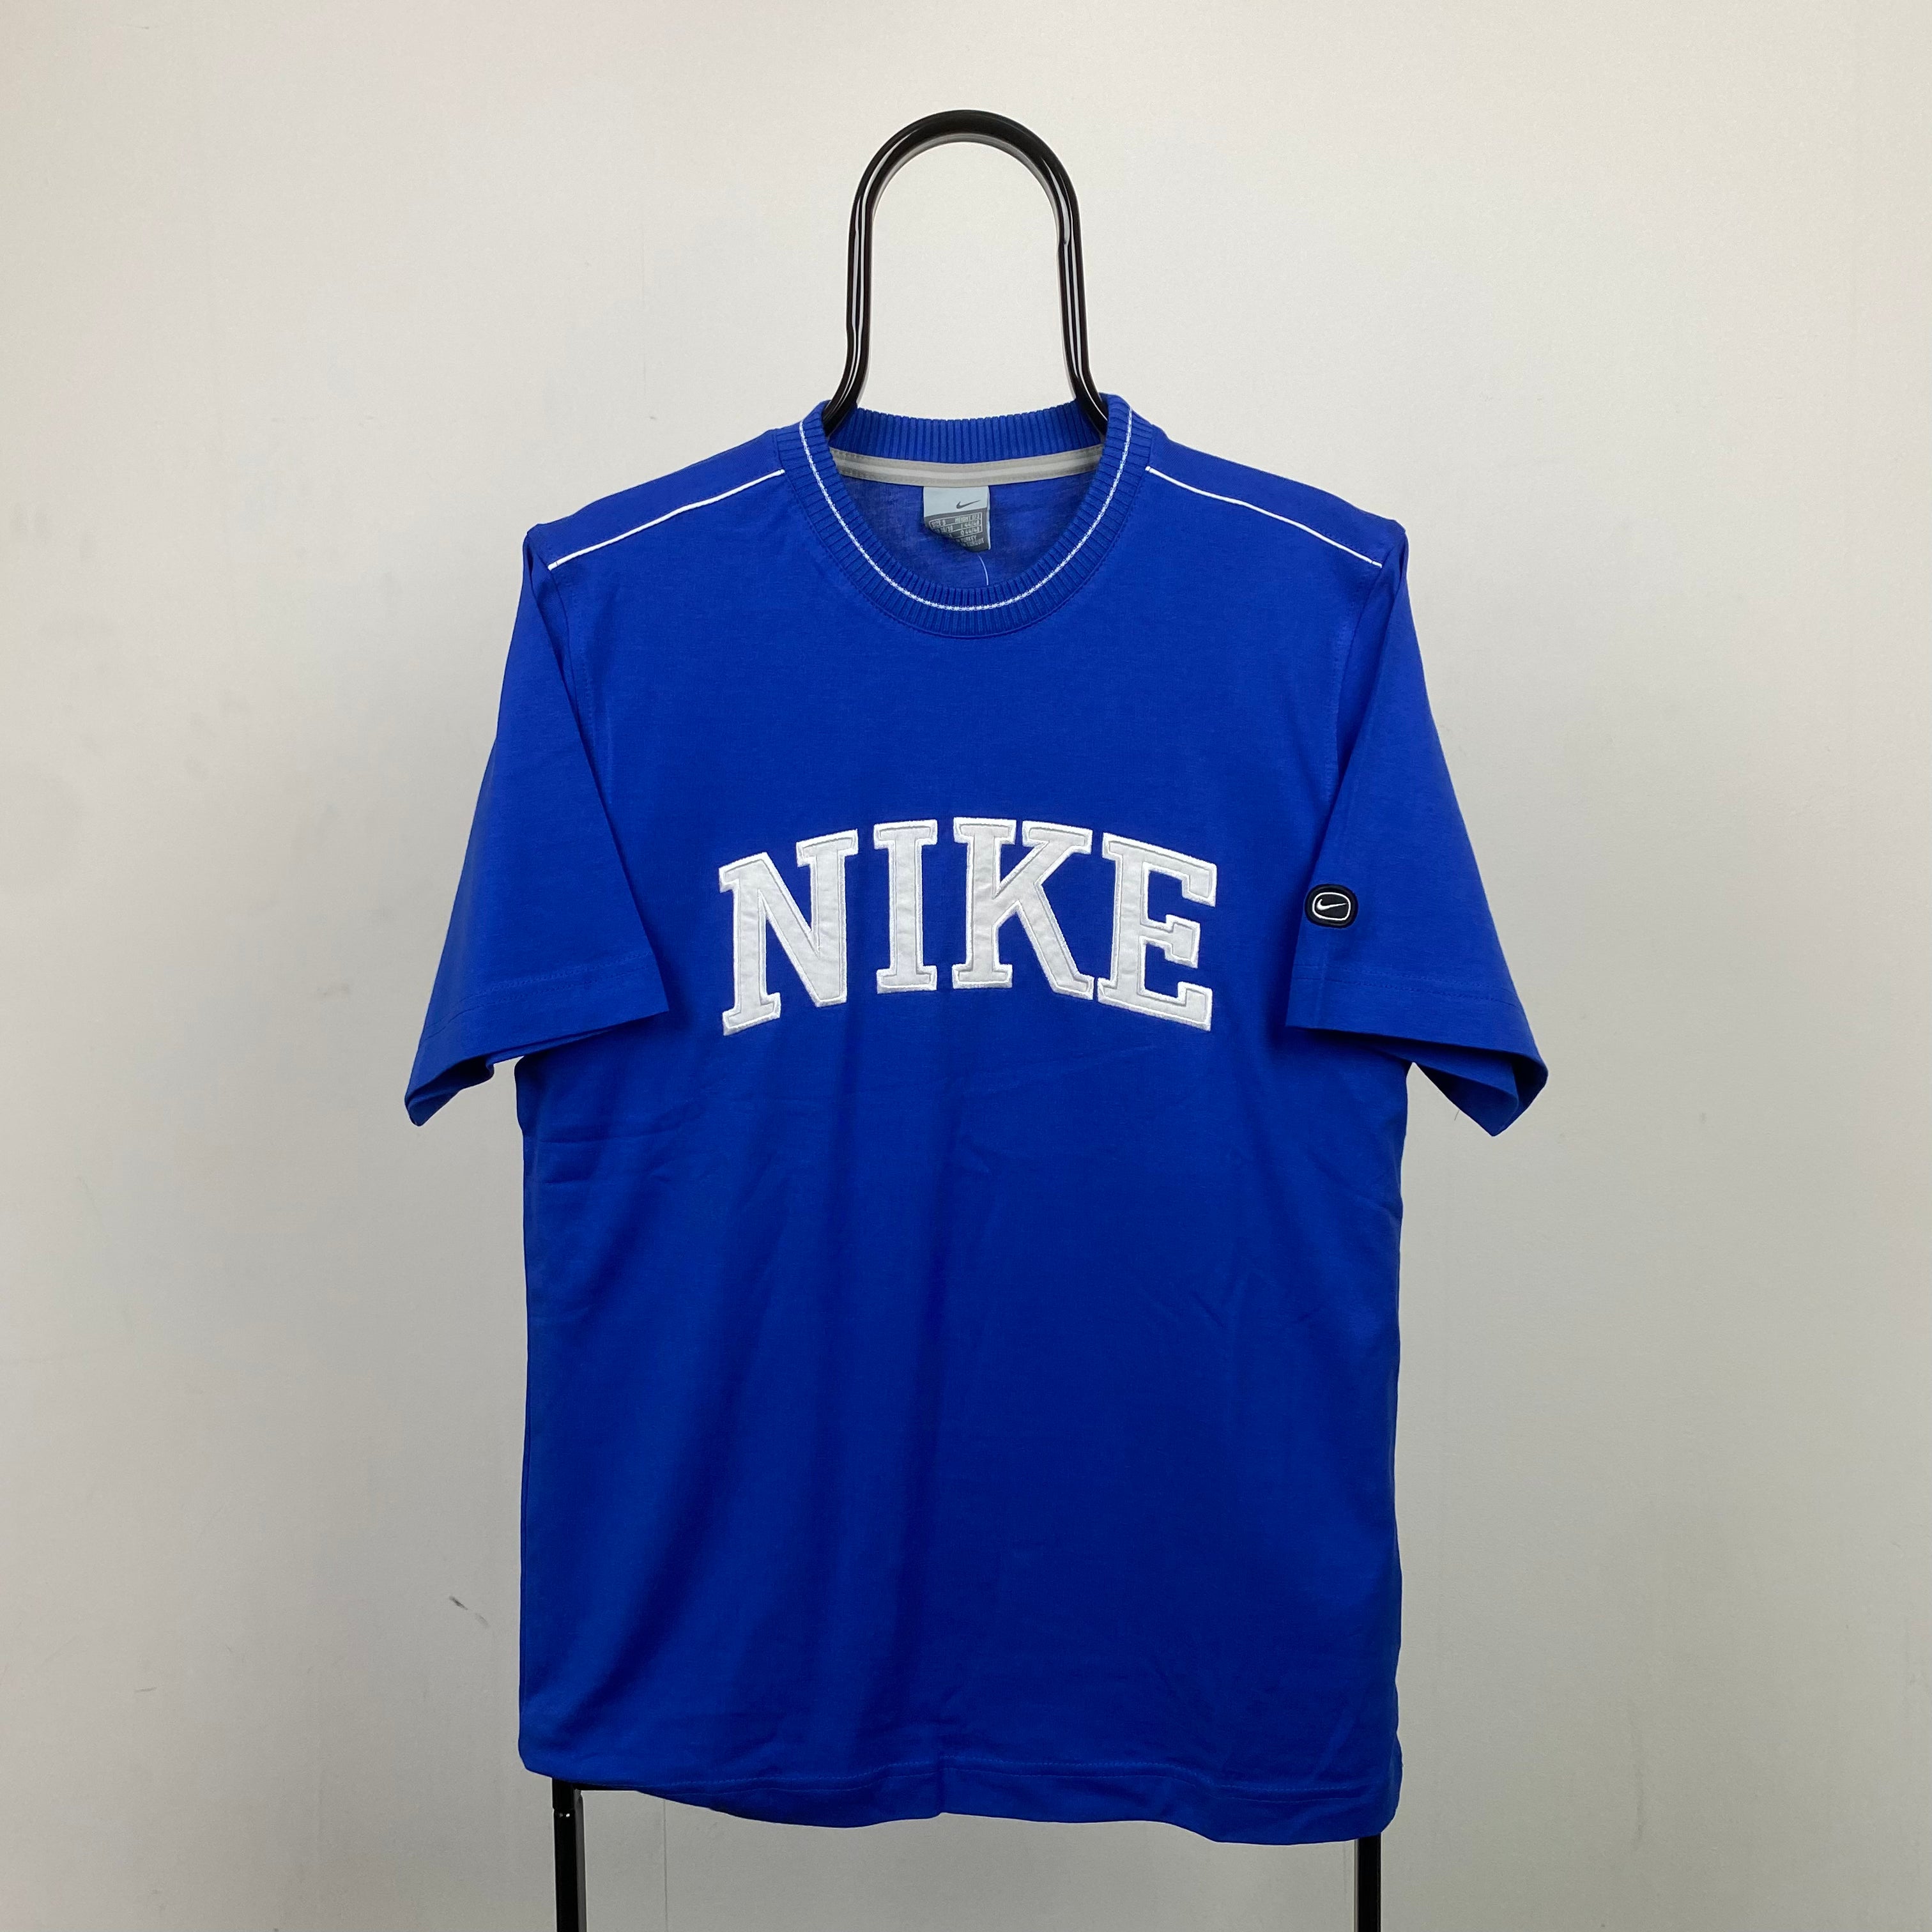 00s Nike College T-Shirt Blue Small